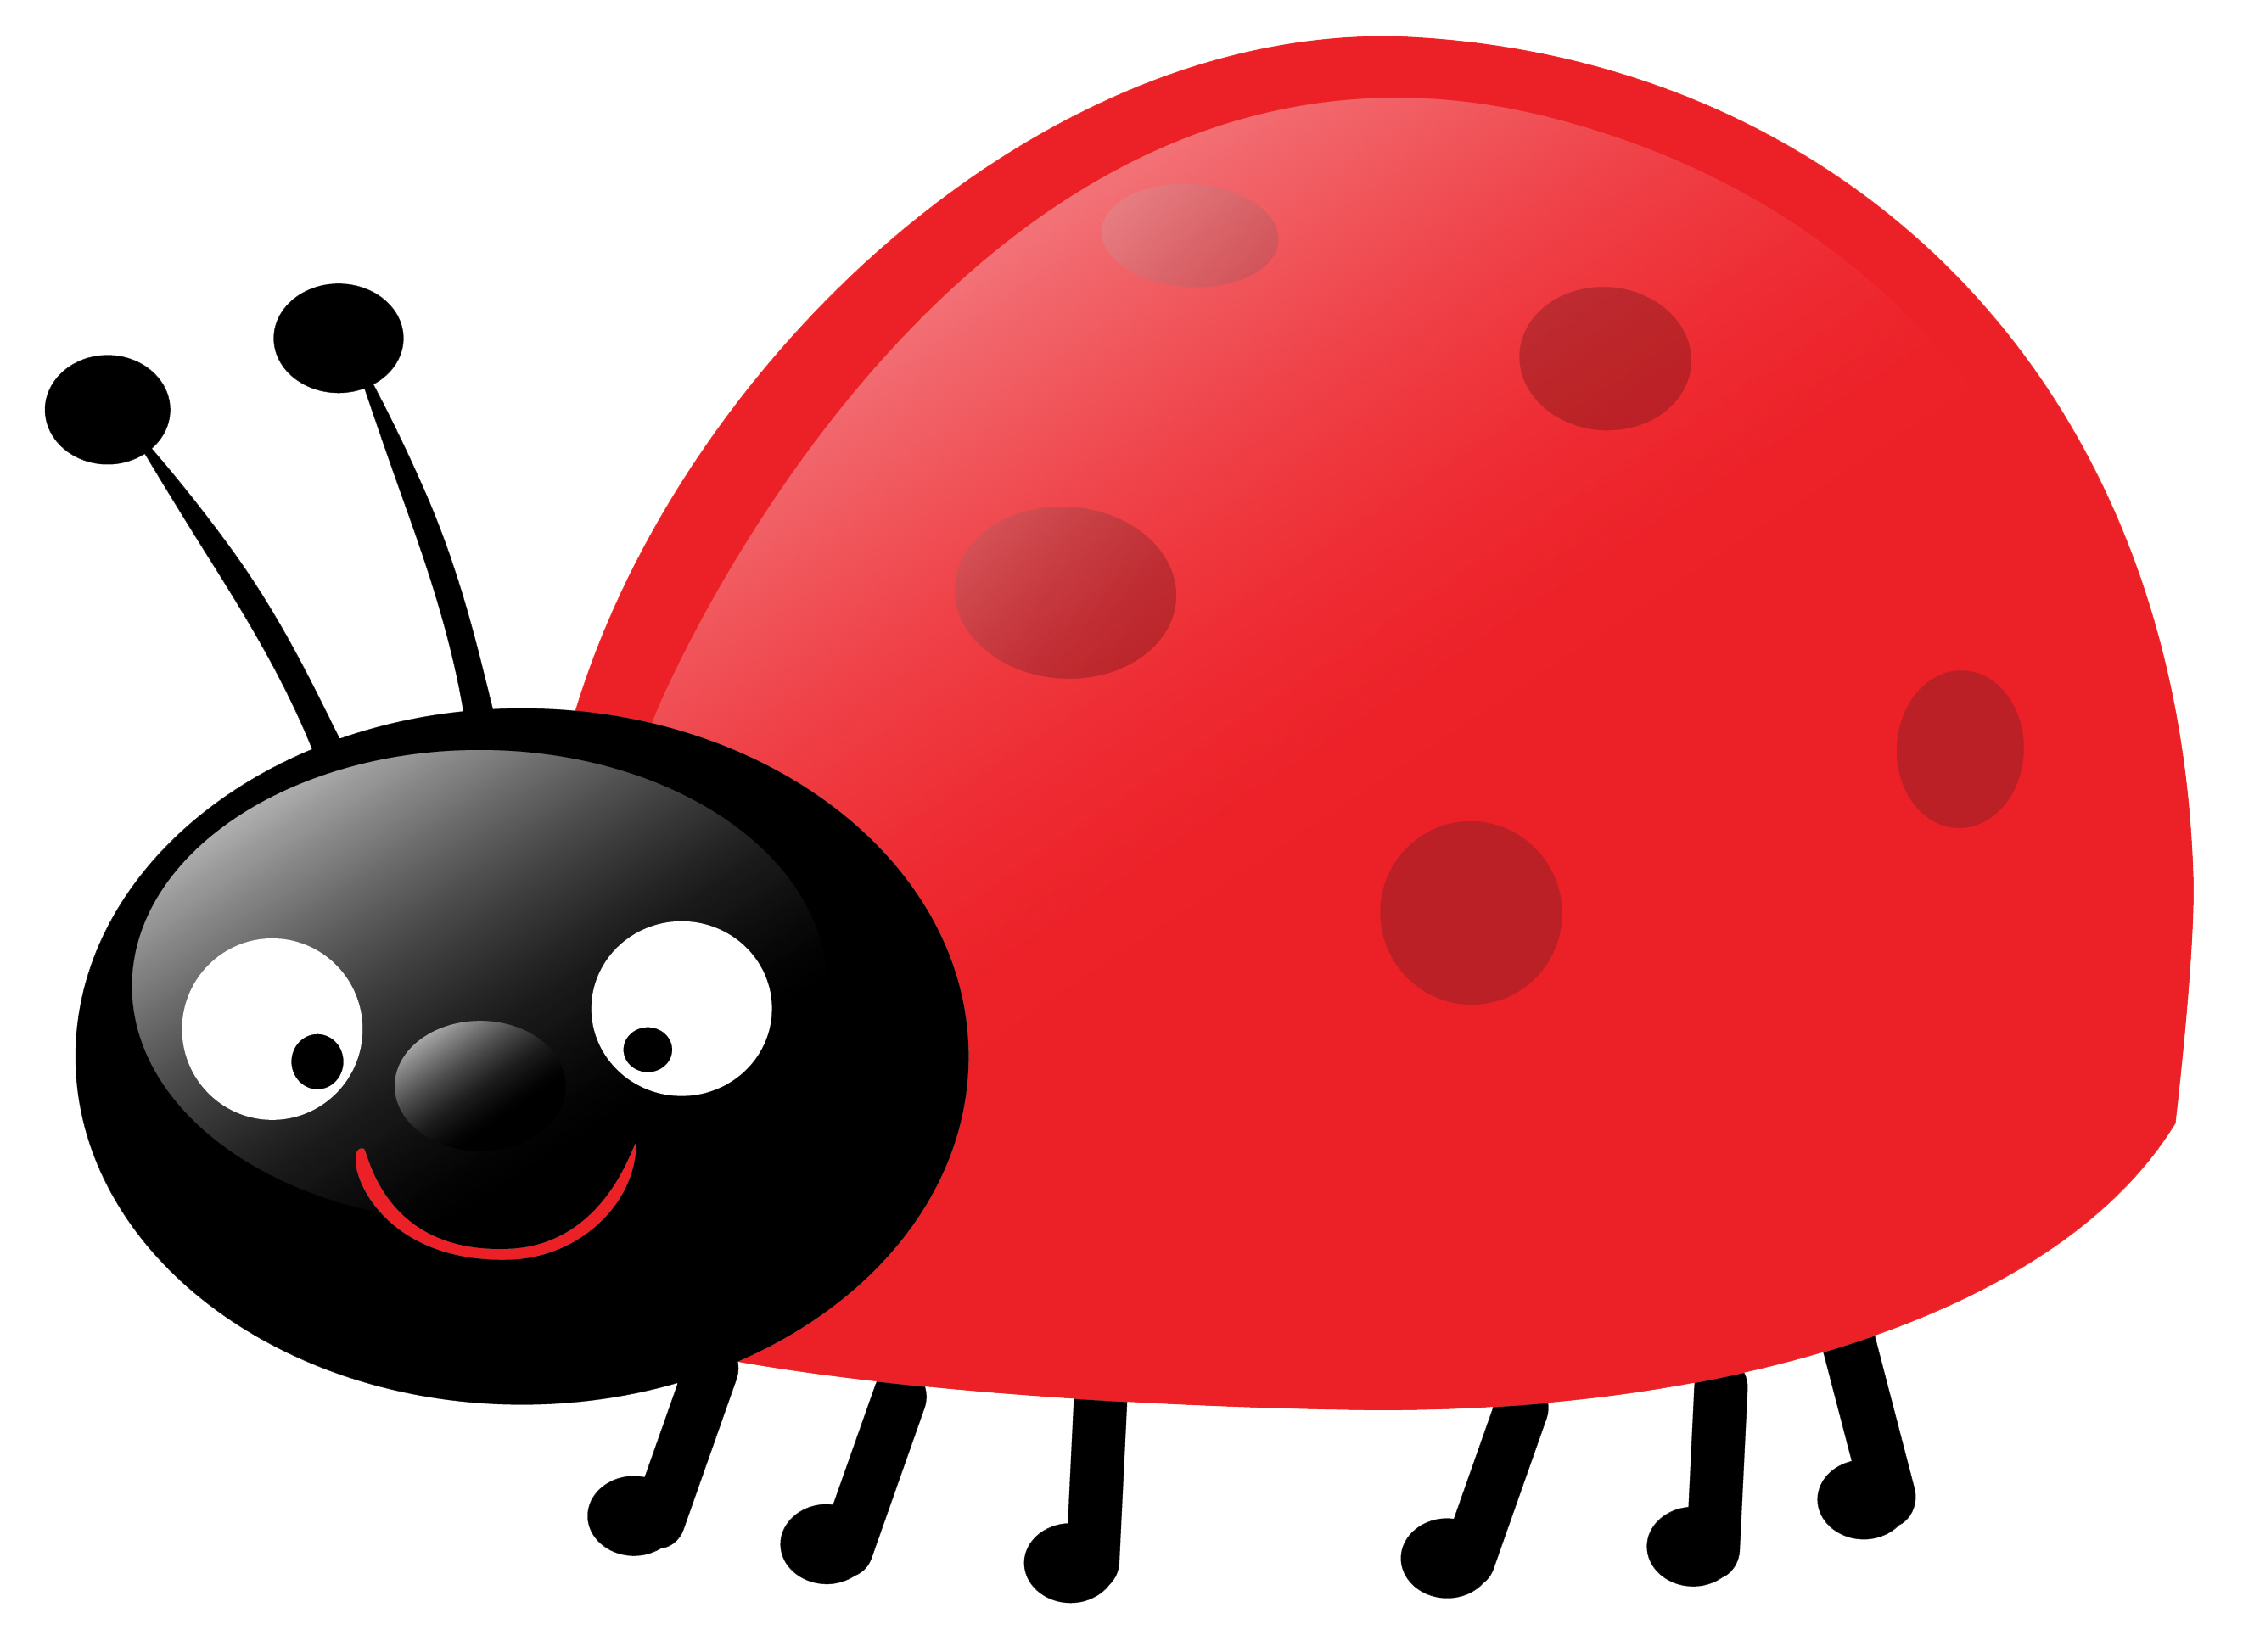 Ladybug clipart black and white free clipart images 3